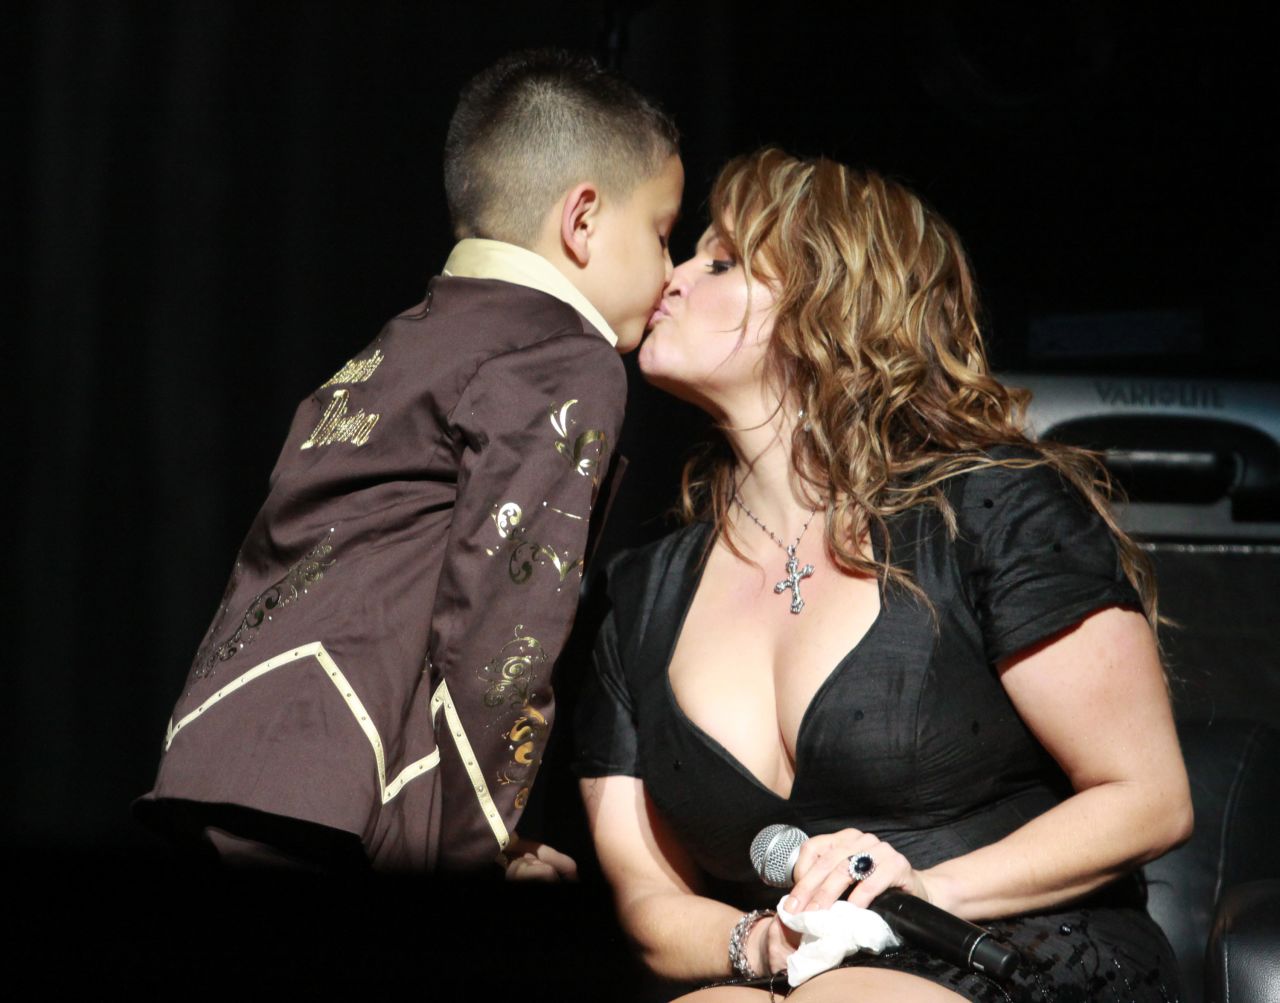 The singer kisses her son during a July 2009 concert in Los Angeles.